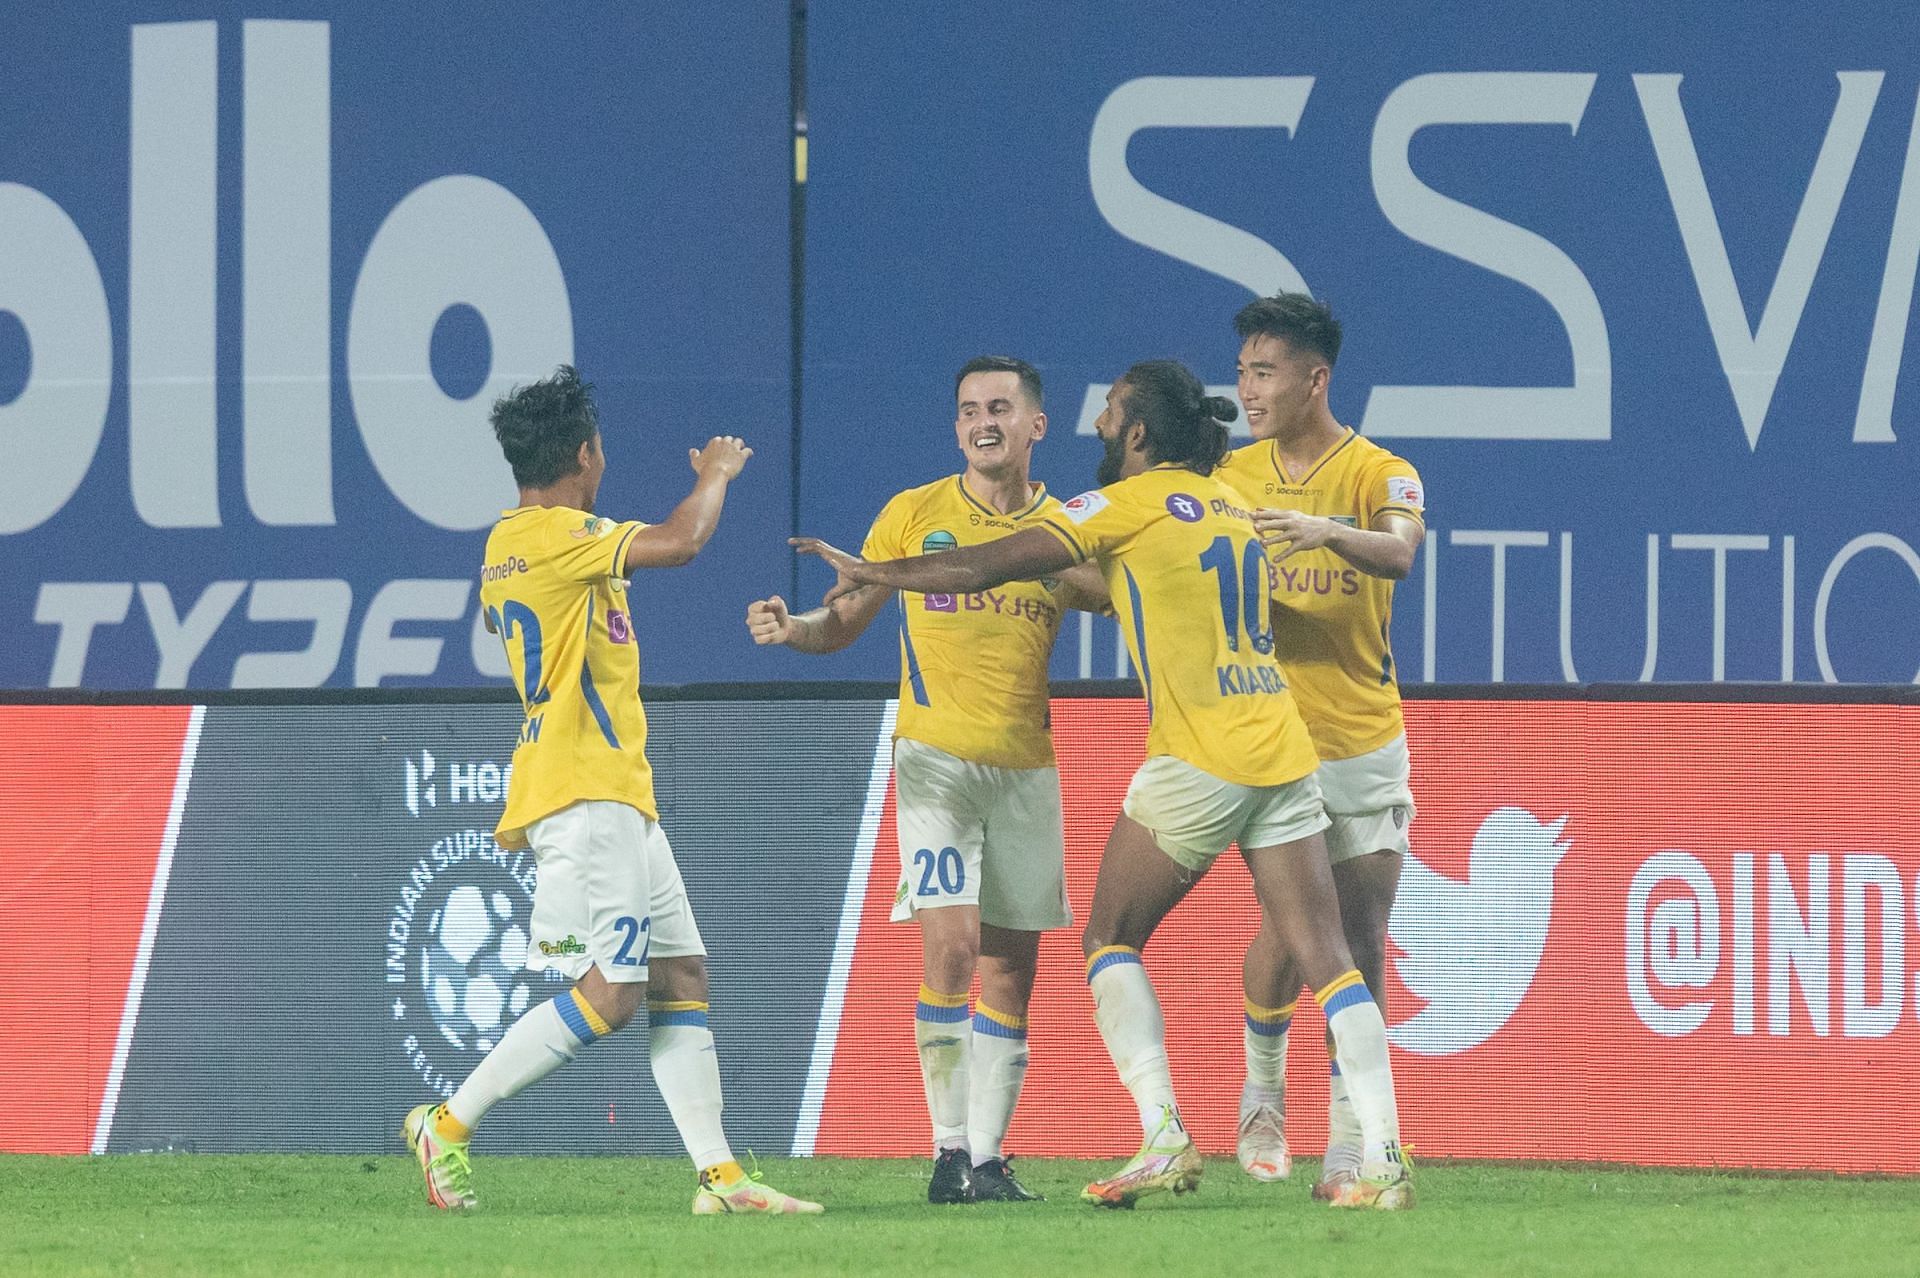 Kerala Blasters FC will want to get back to winning ways after falling prey to the Blues in their last match (Image Courtesy: ISL)